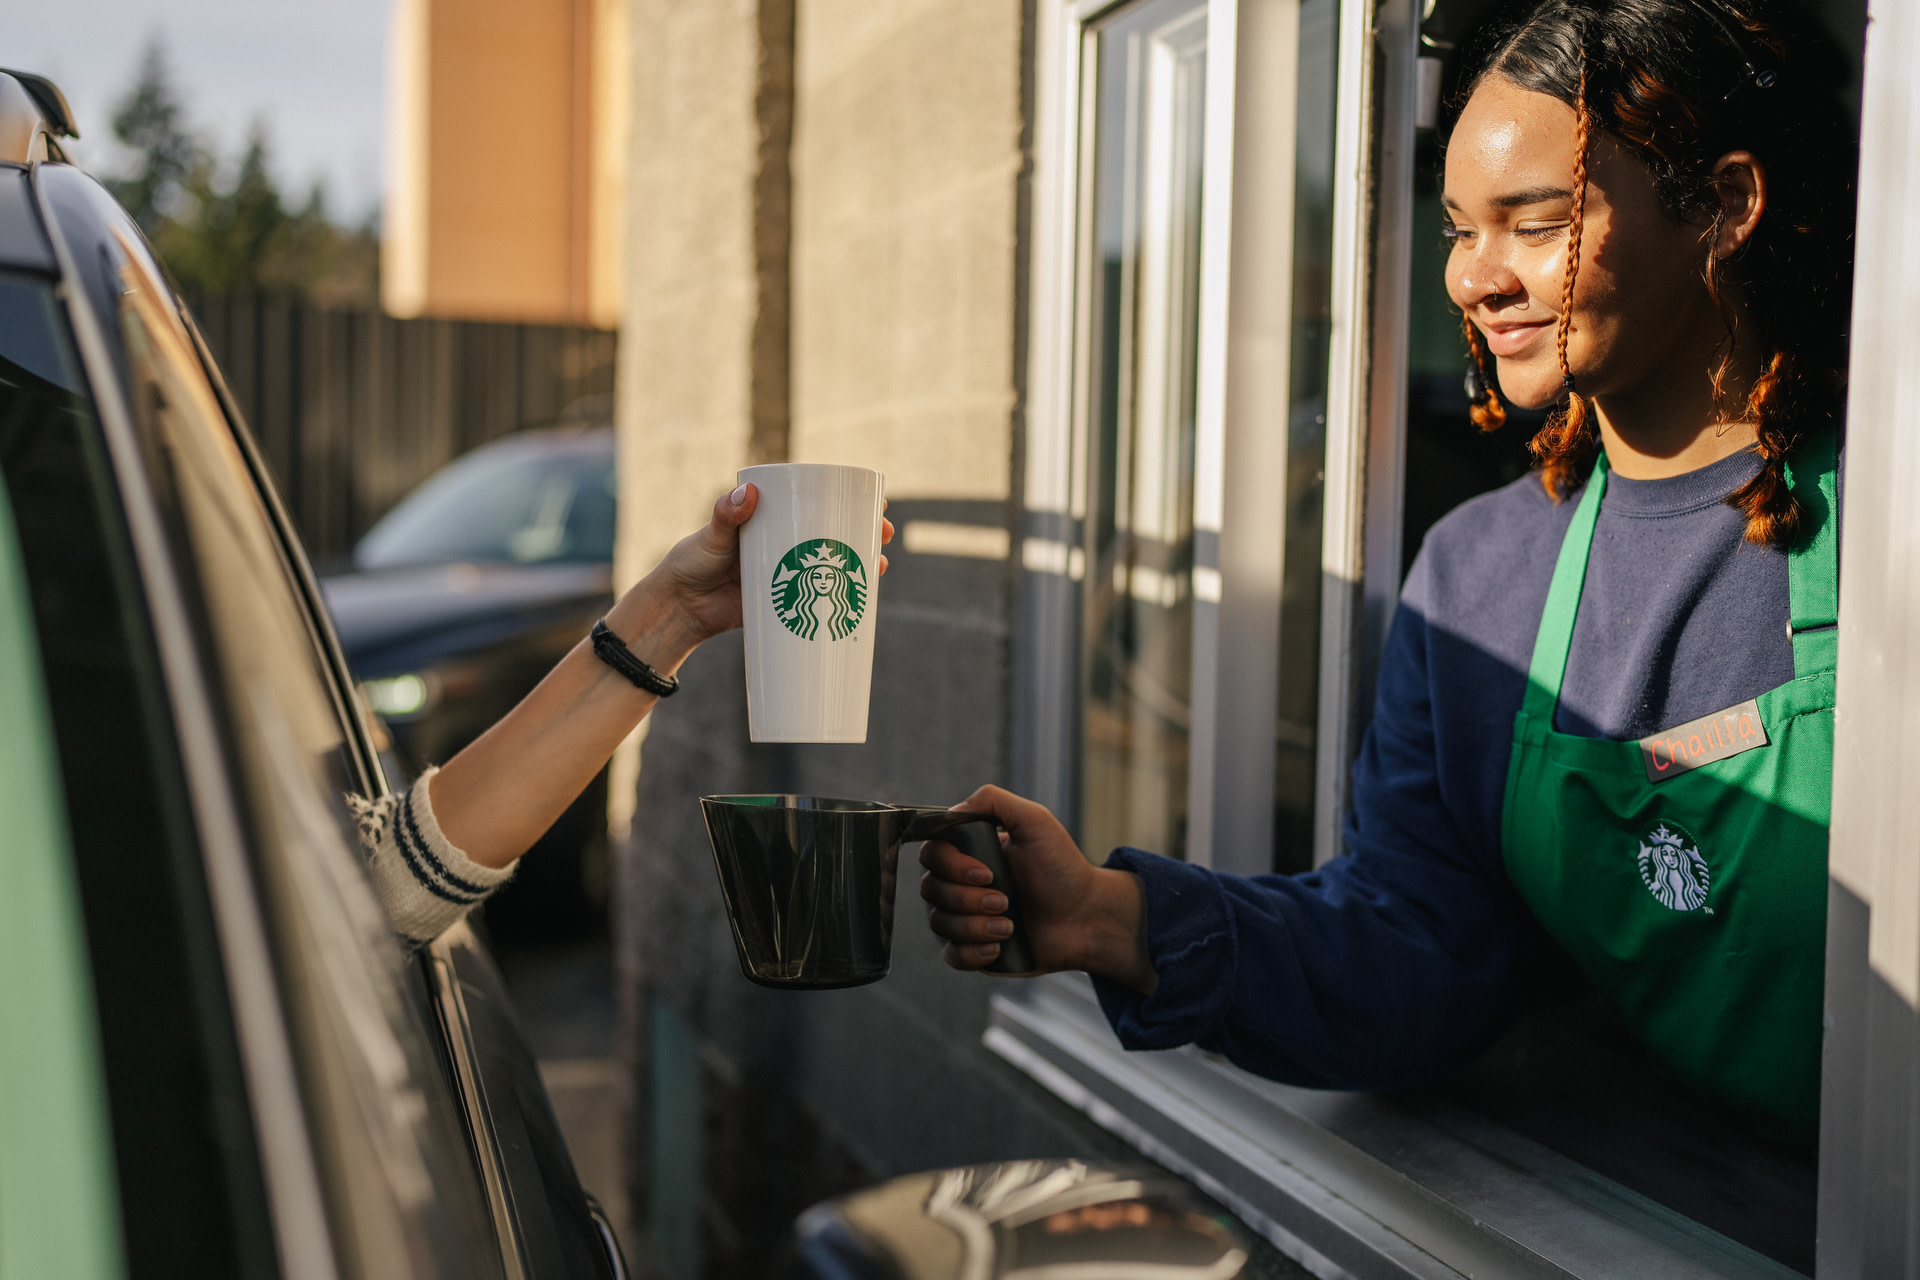 KnowESG_Starbucks Accepts Reusables, Drive-Thru & Mobile Orders